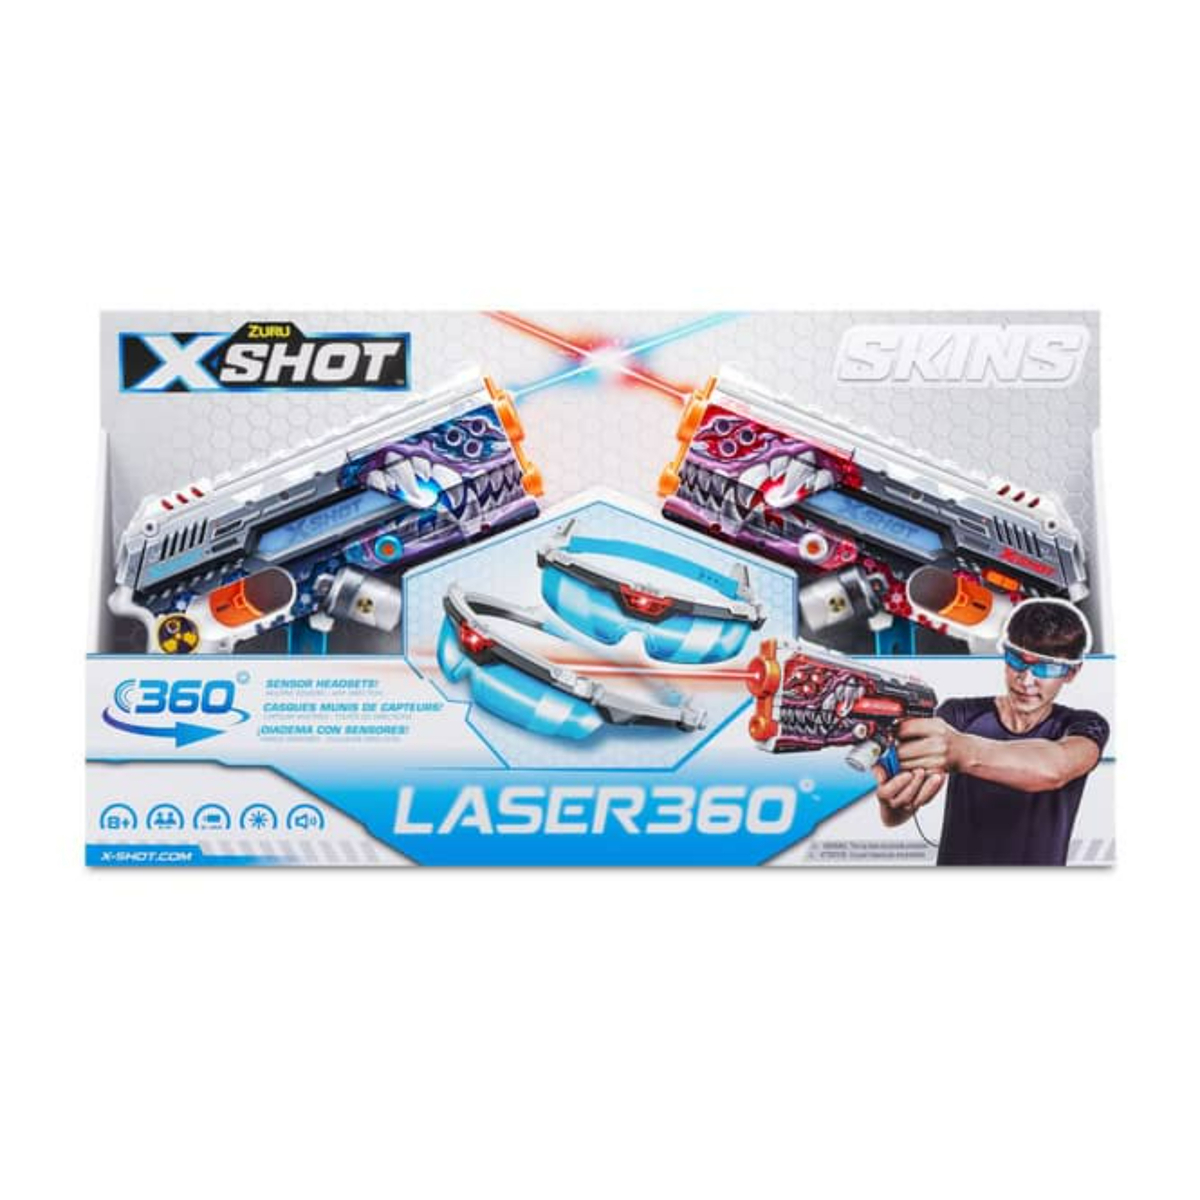 X-Shot Skins Laser 360°, 8 Years and Above, S1 XS-36602